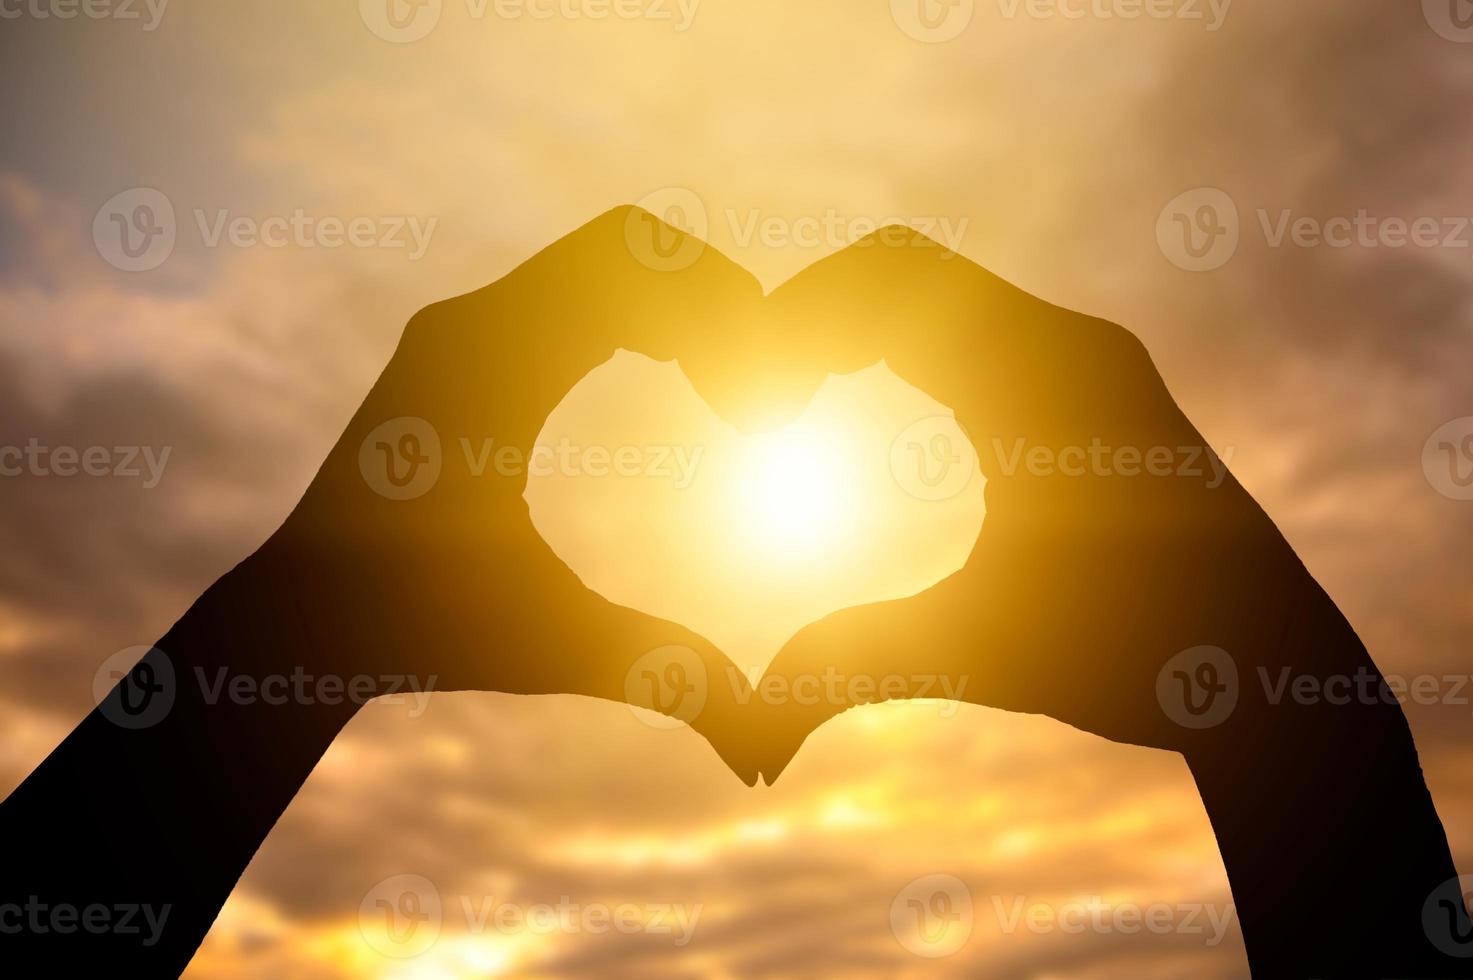 The hands of women and men are the heart shape with the sun light passing through the hands photo